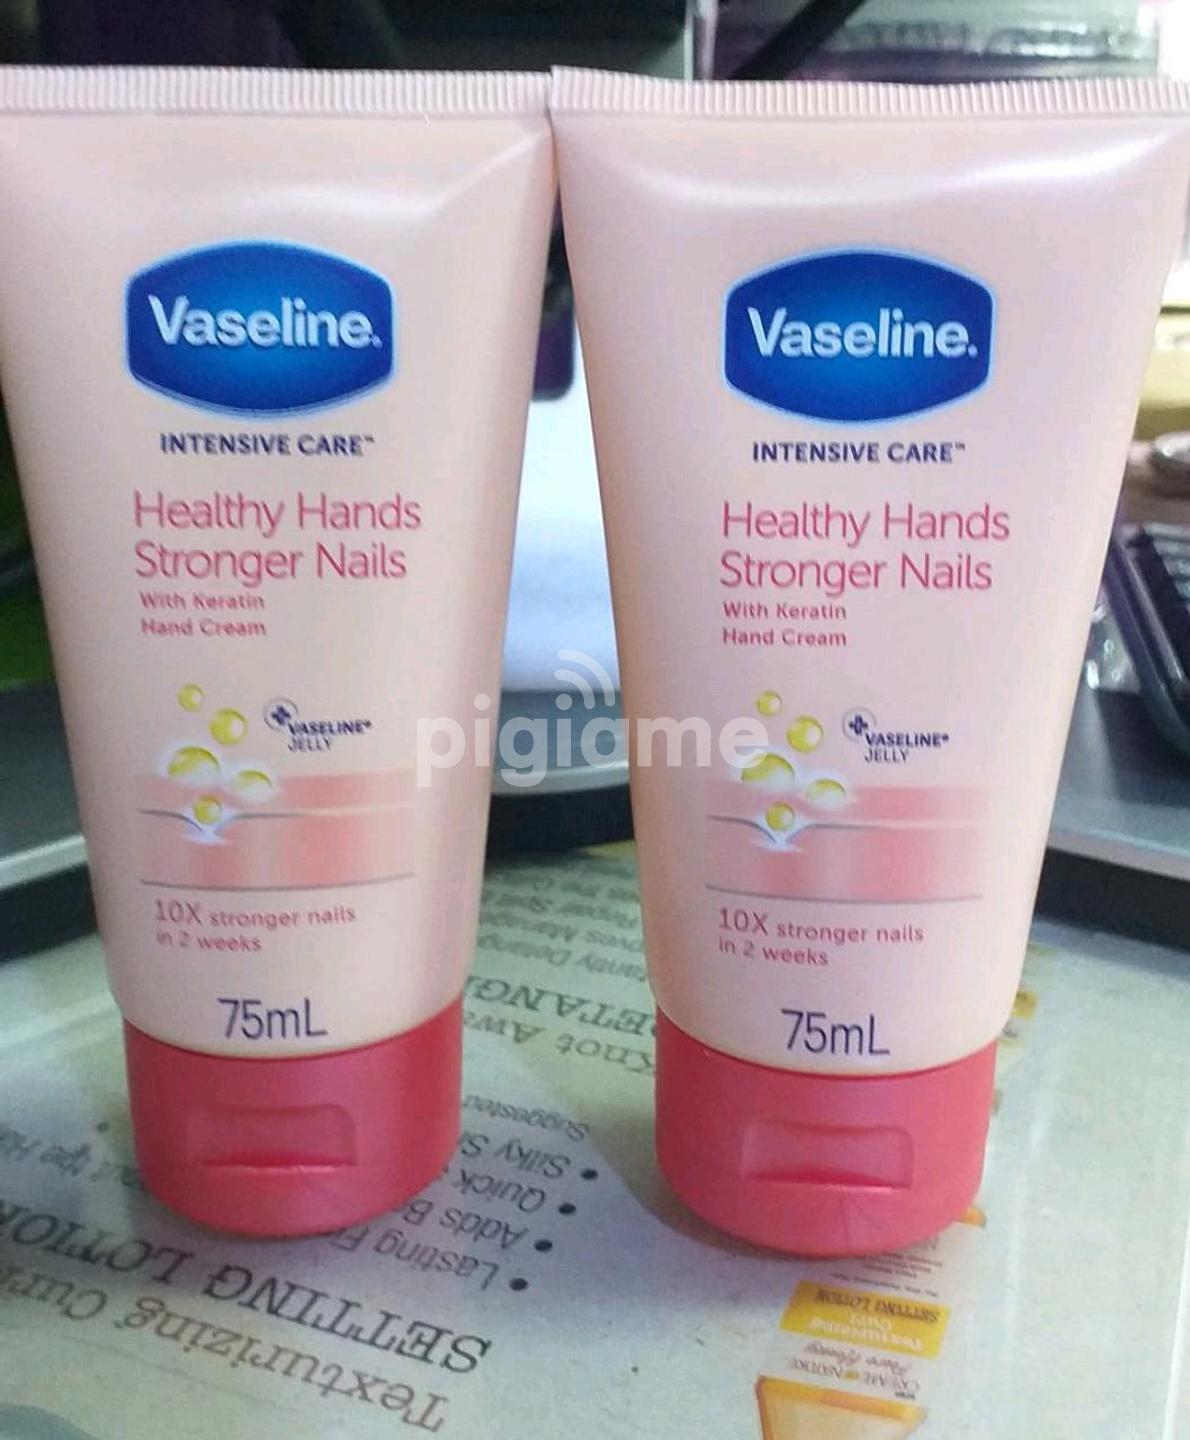 Vaseline Intensive Care Hand Lotion, Healthy Hands Stronger Nails